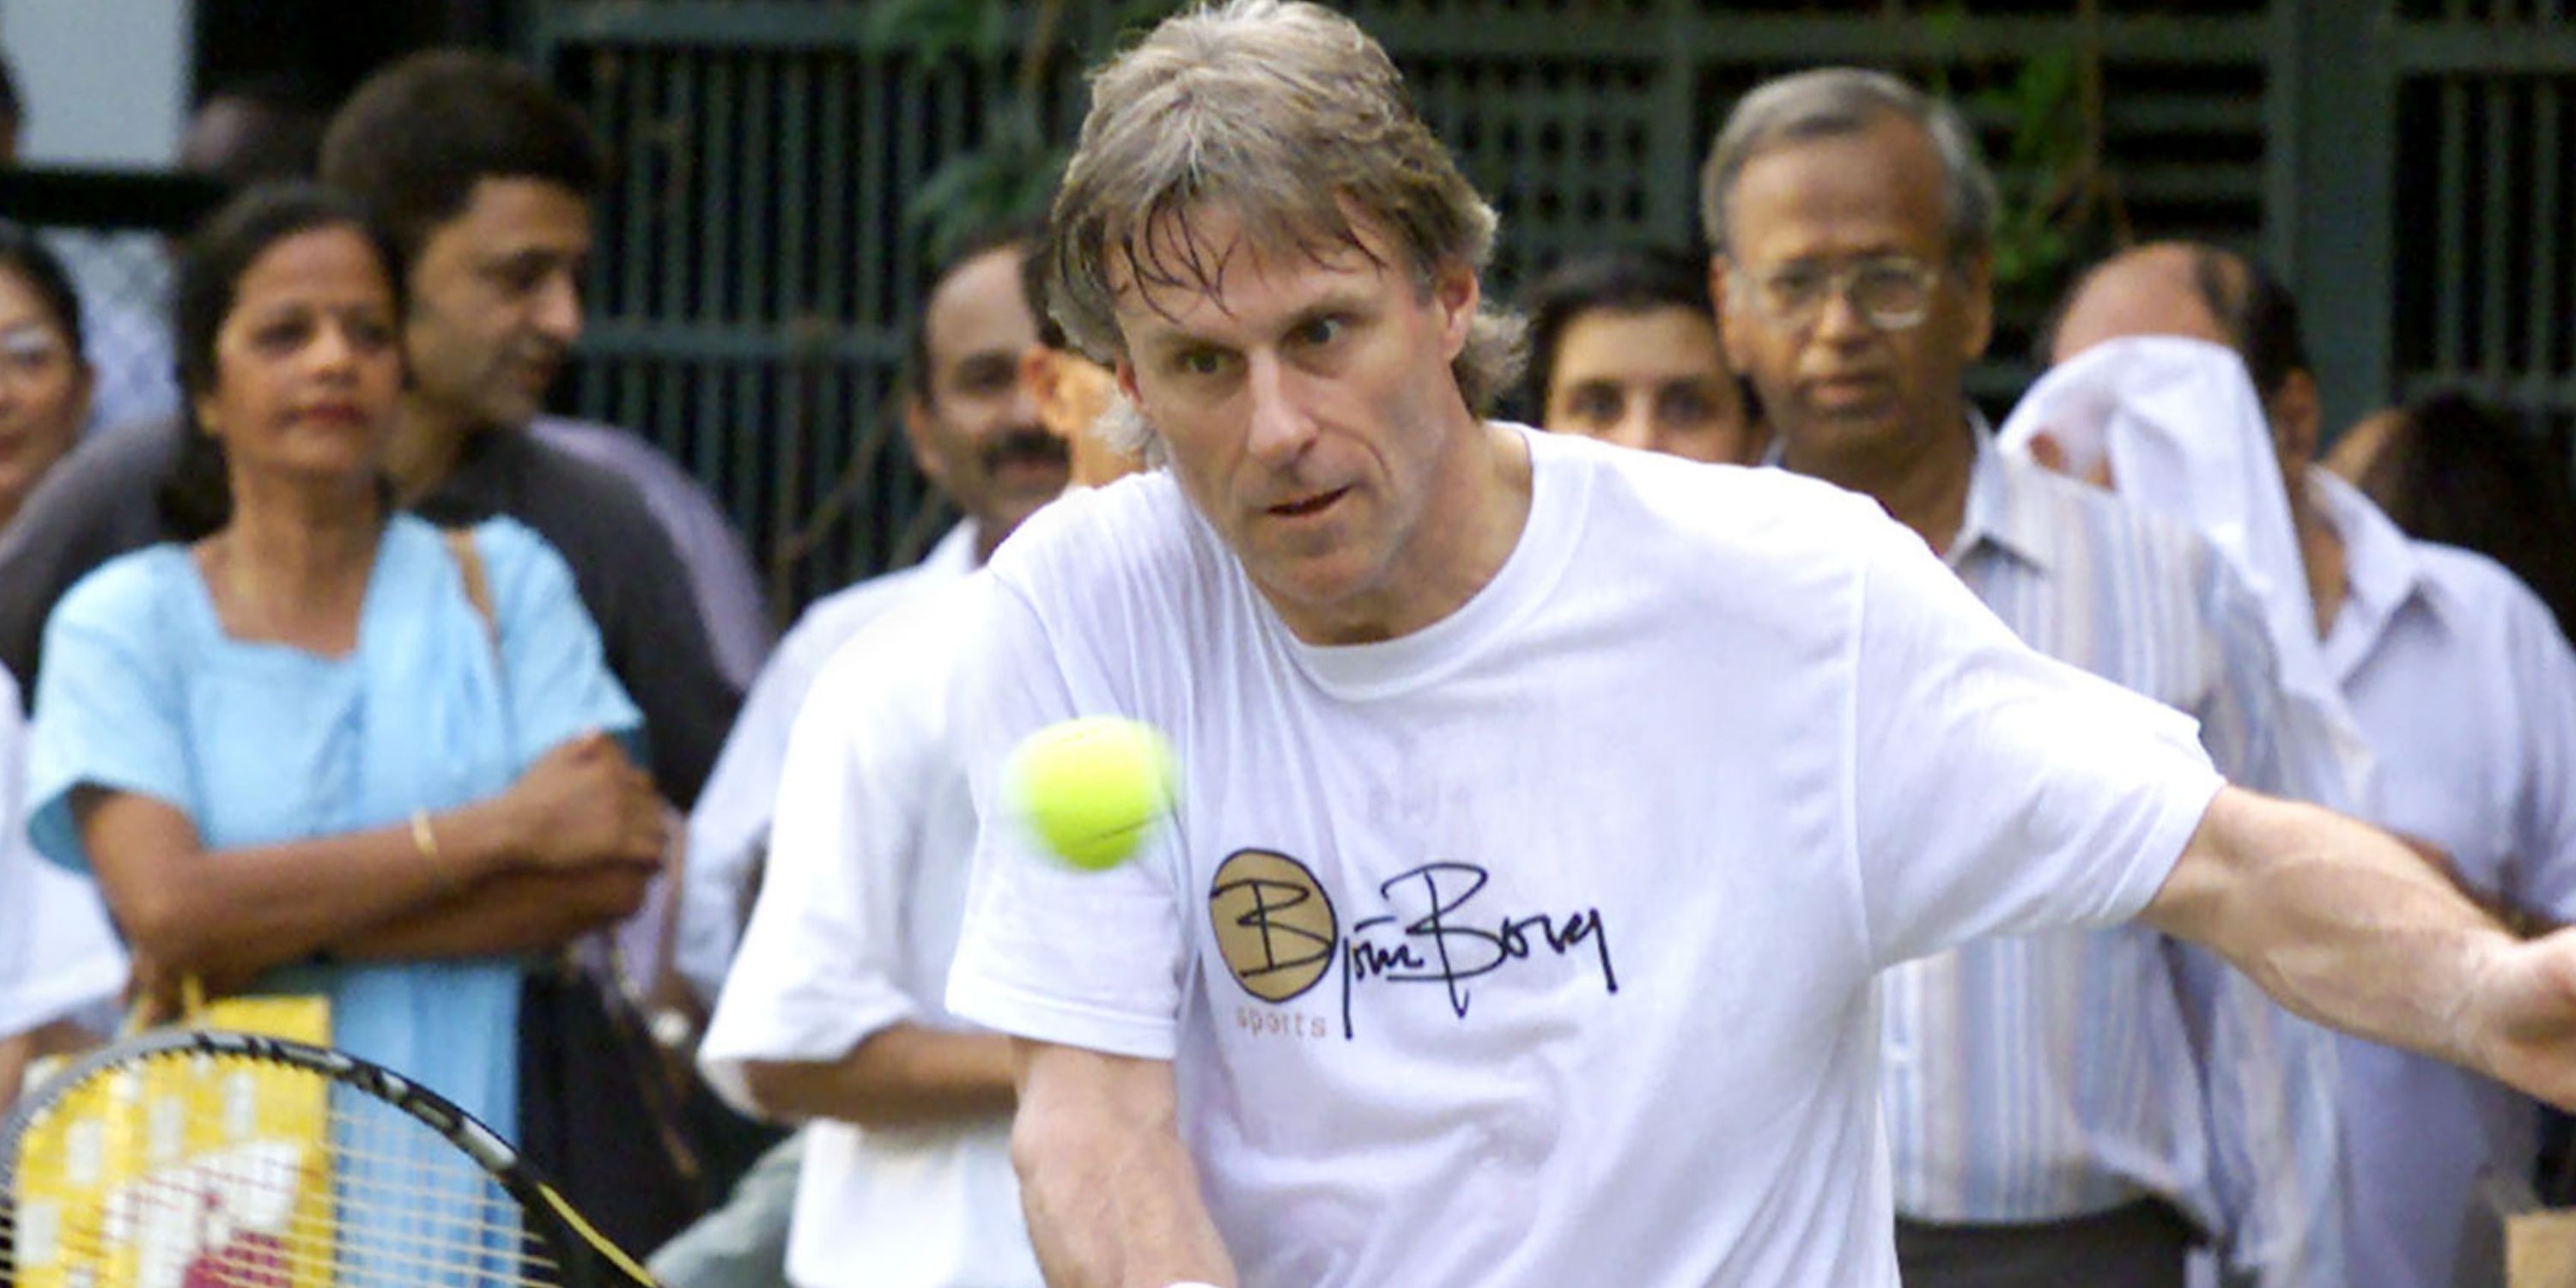 Tennis enthusiasts watch Bjorn Borg play a shot in Bombay.